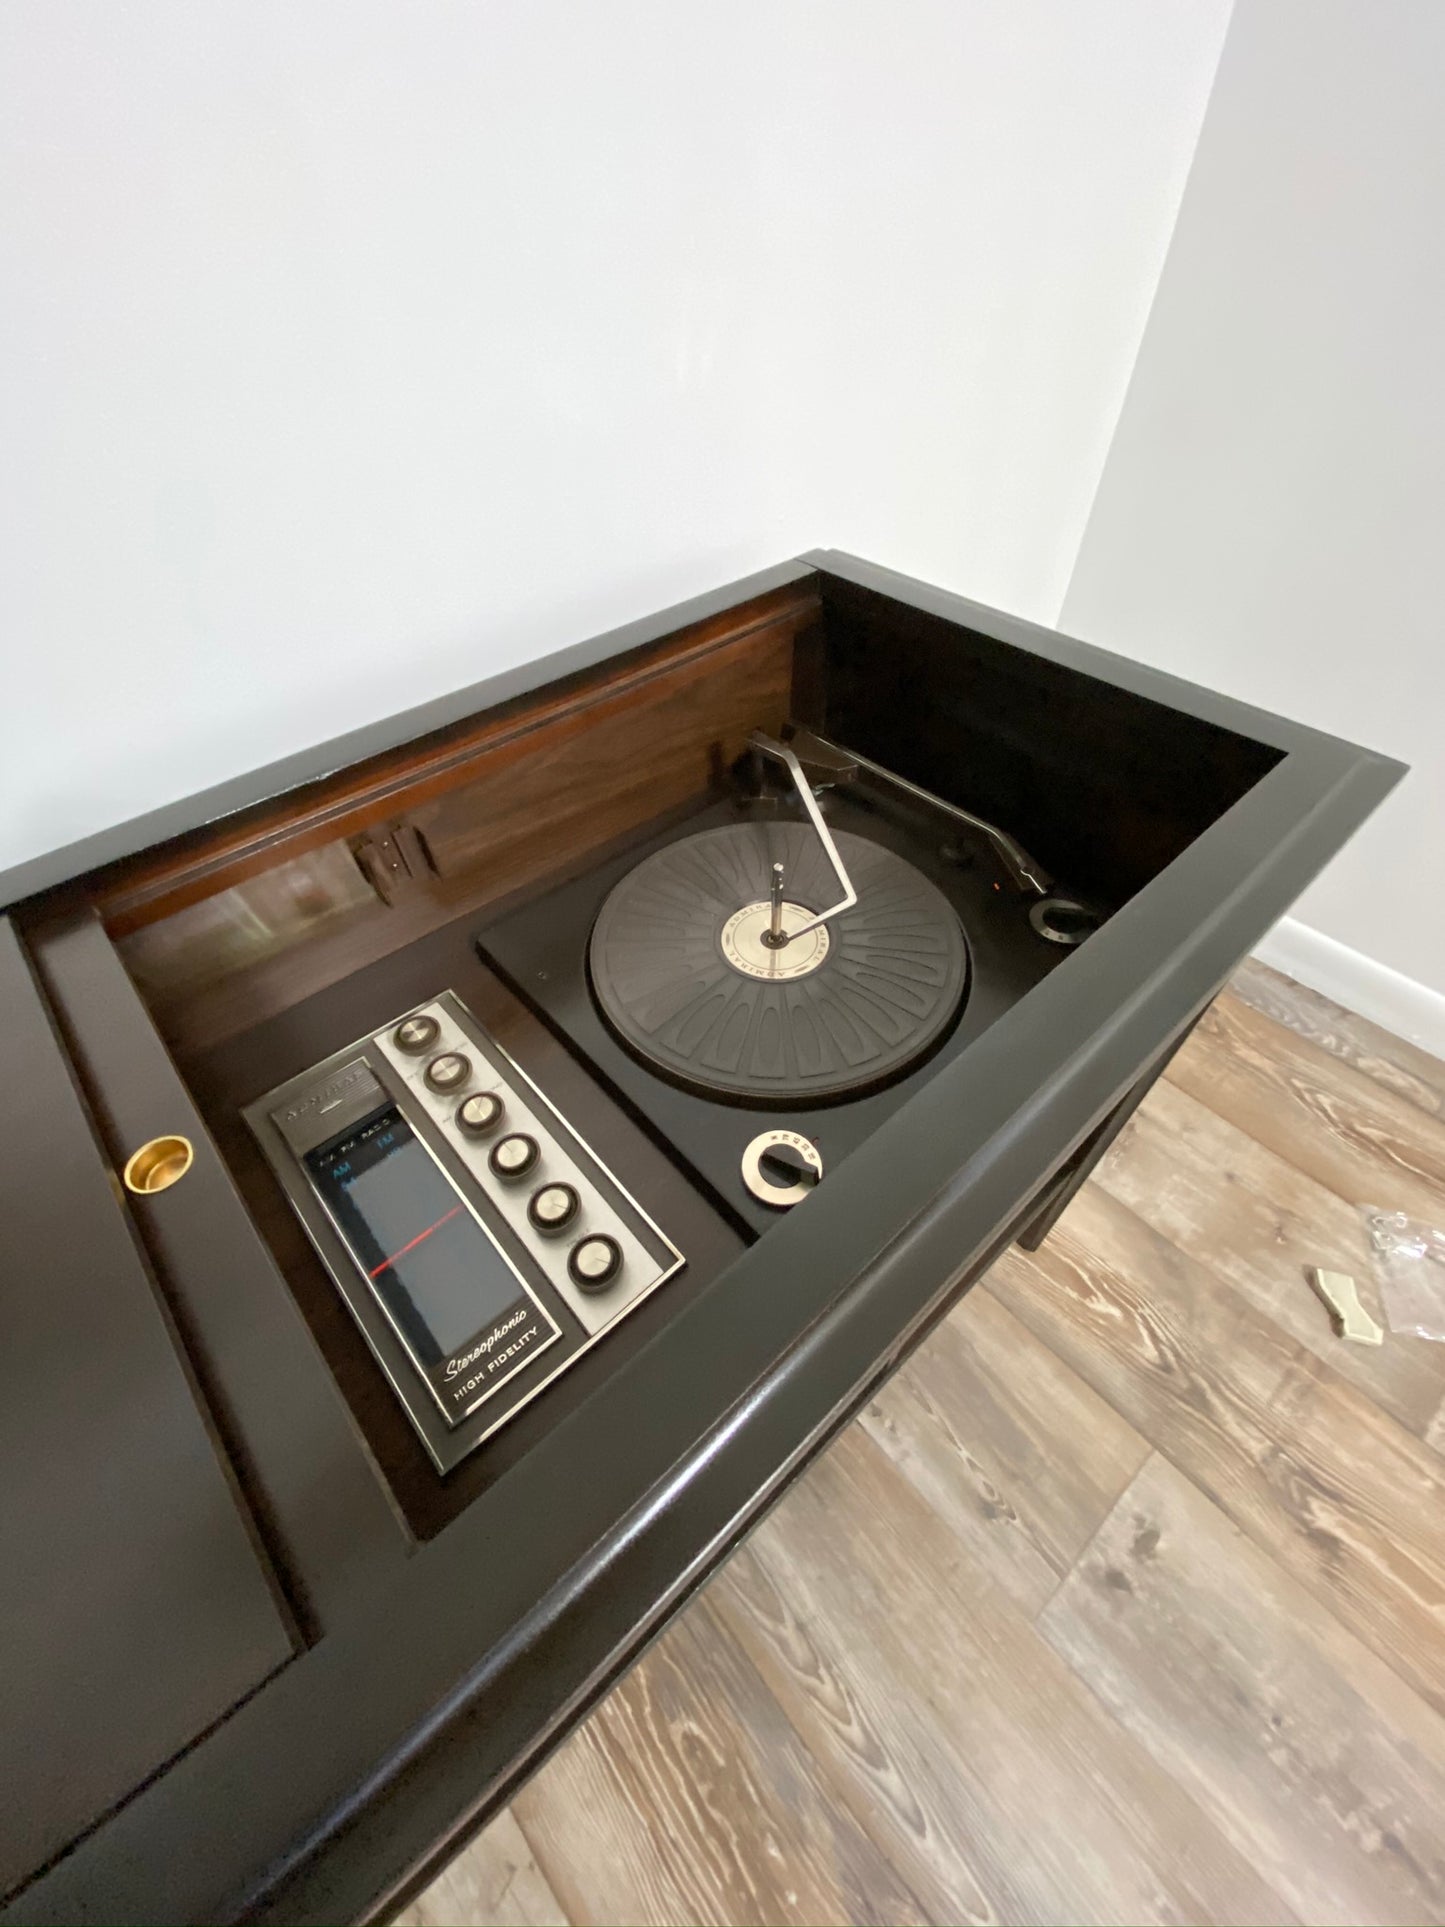 **SOLD OUT**  ADMIRAL Vintage Stereo Console 60s Record Player Changer AM FM Bluetooth Alexa The Vintedge Co.